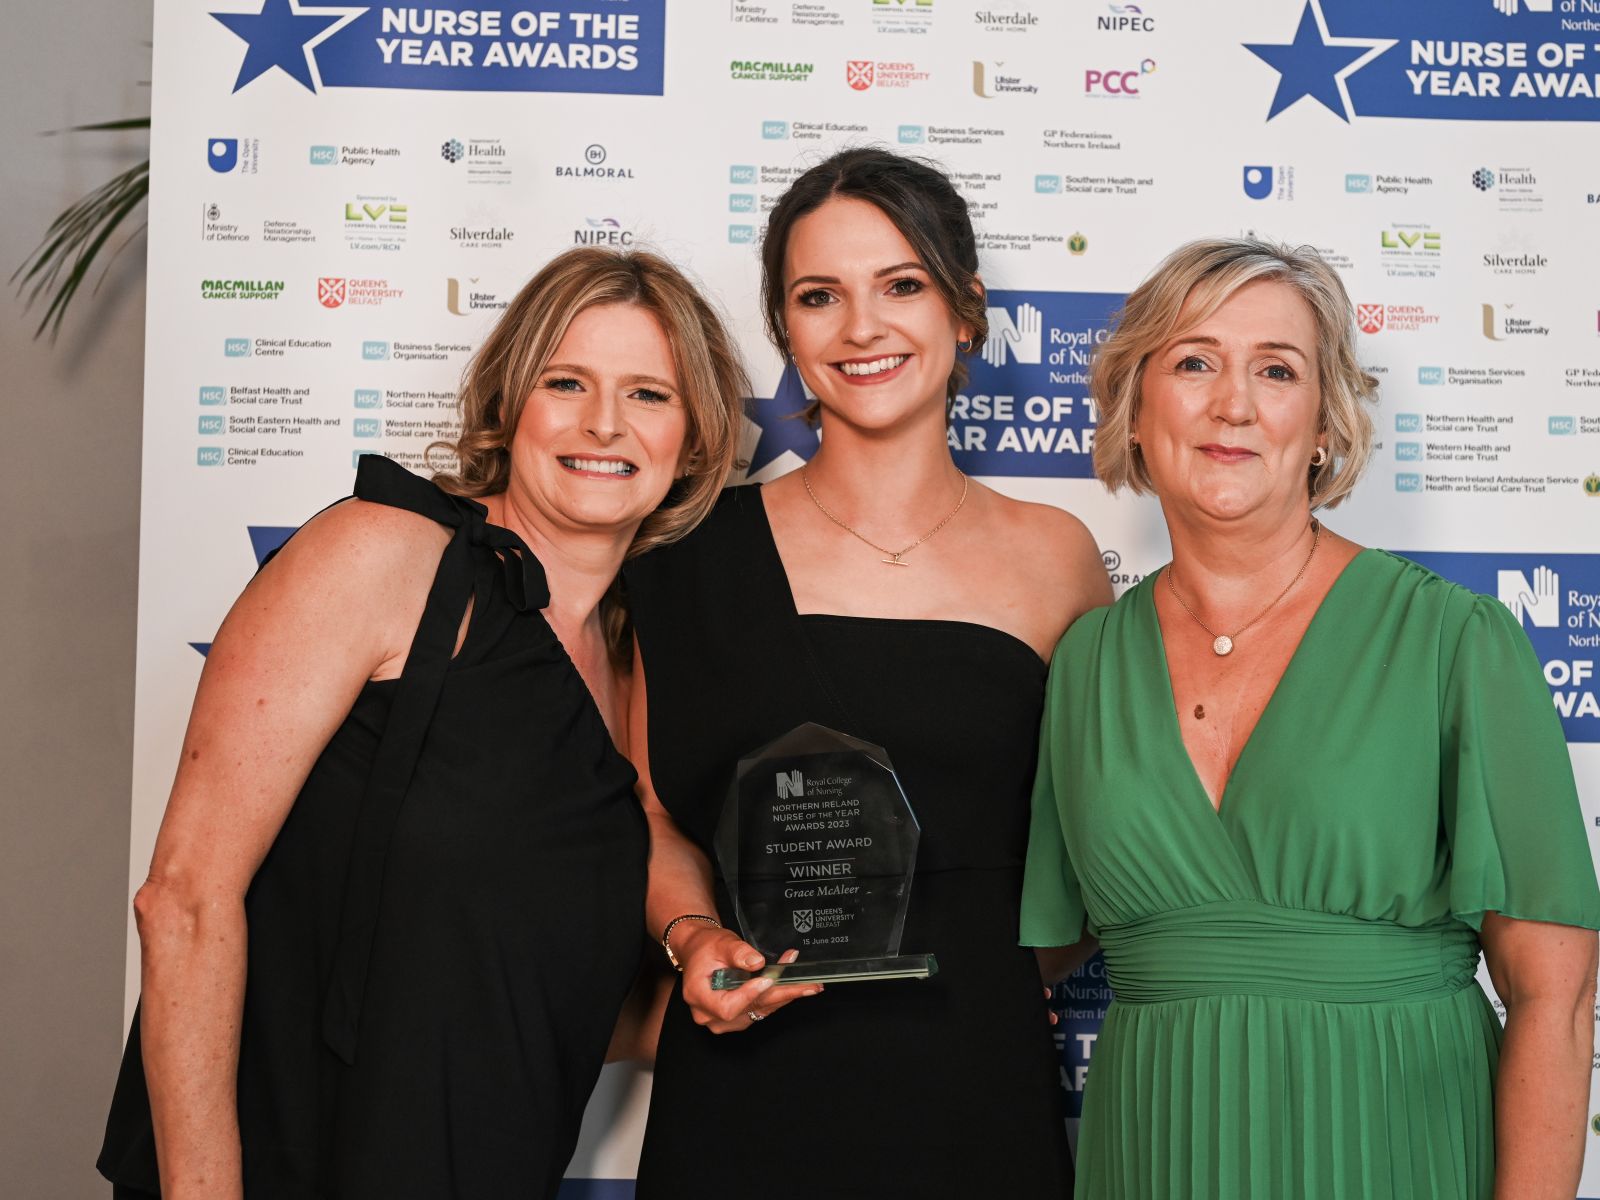 Grace McAleer, centre, pictured with her RCN Northern Ireland Nurse of the Year Award.